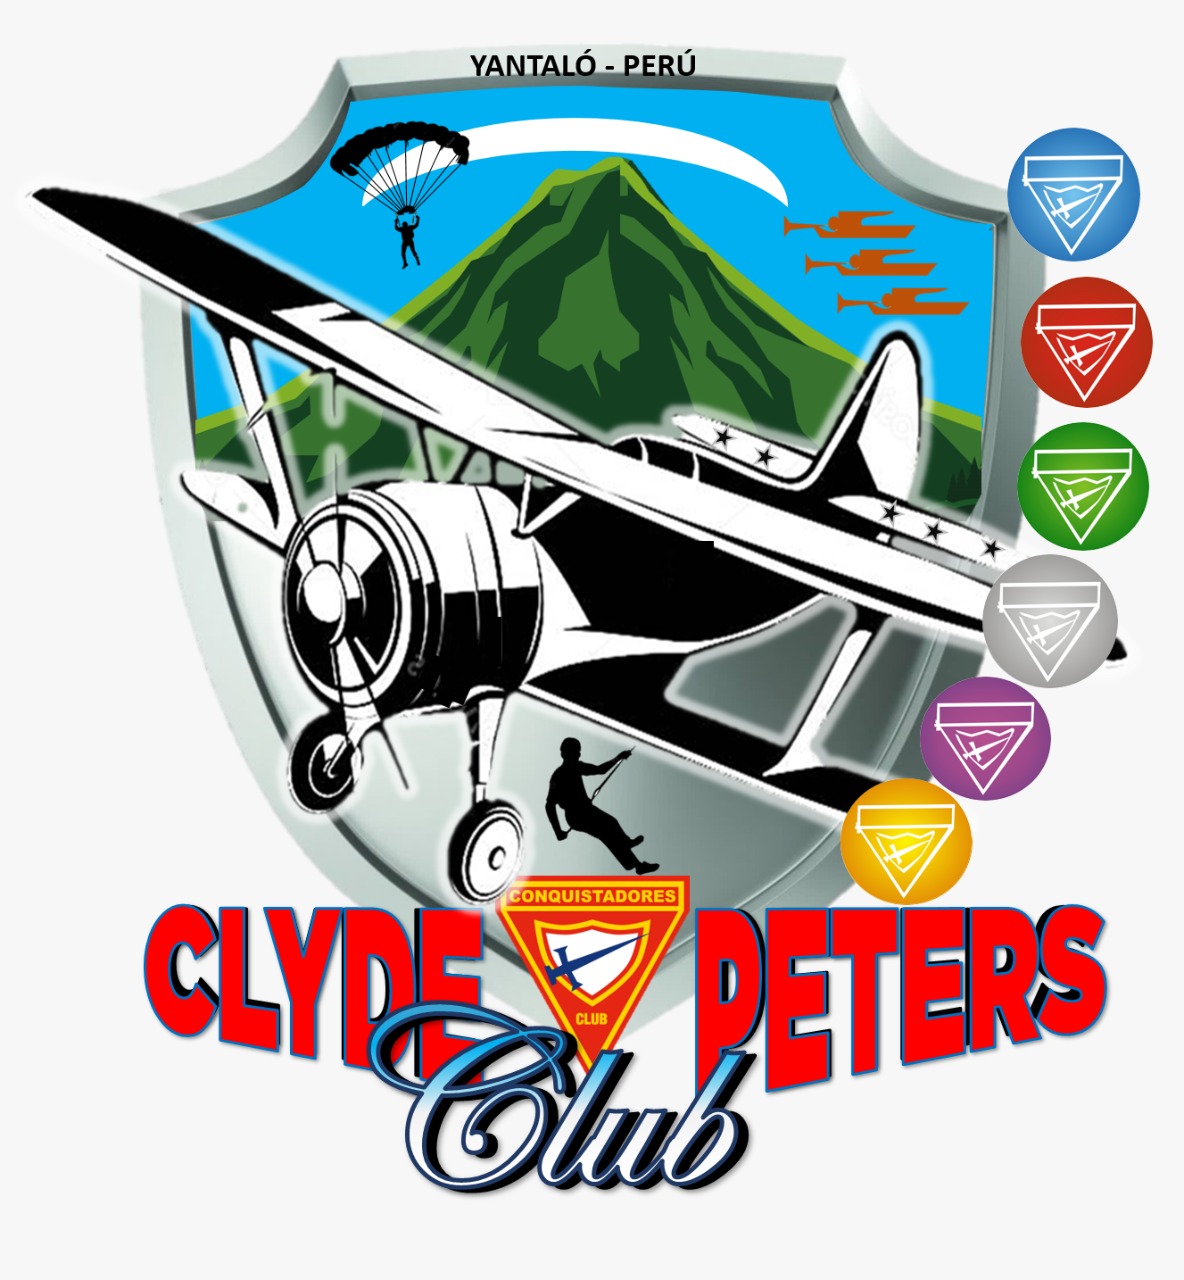 Clyde Peters